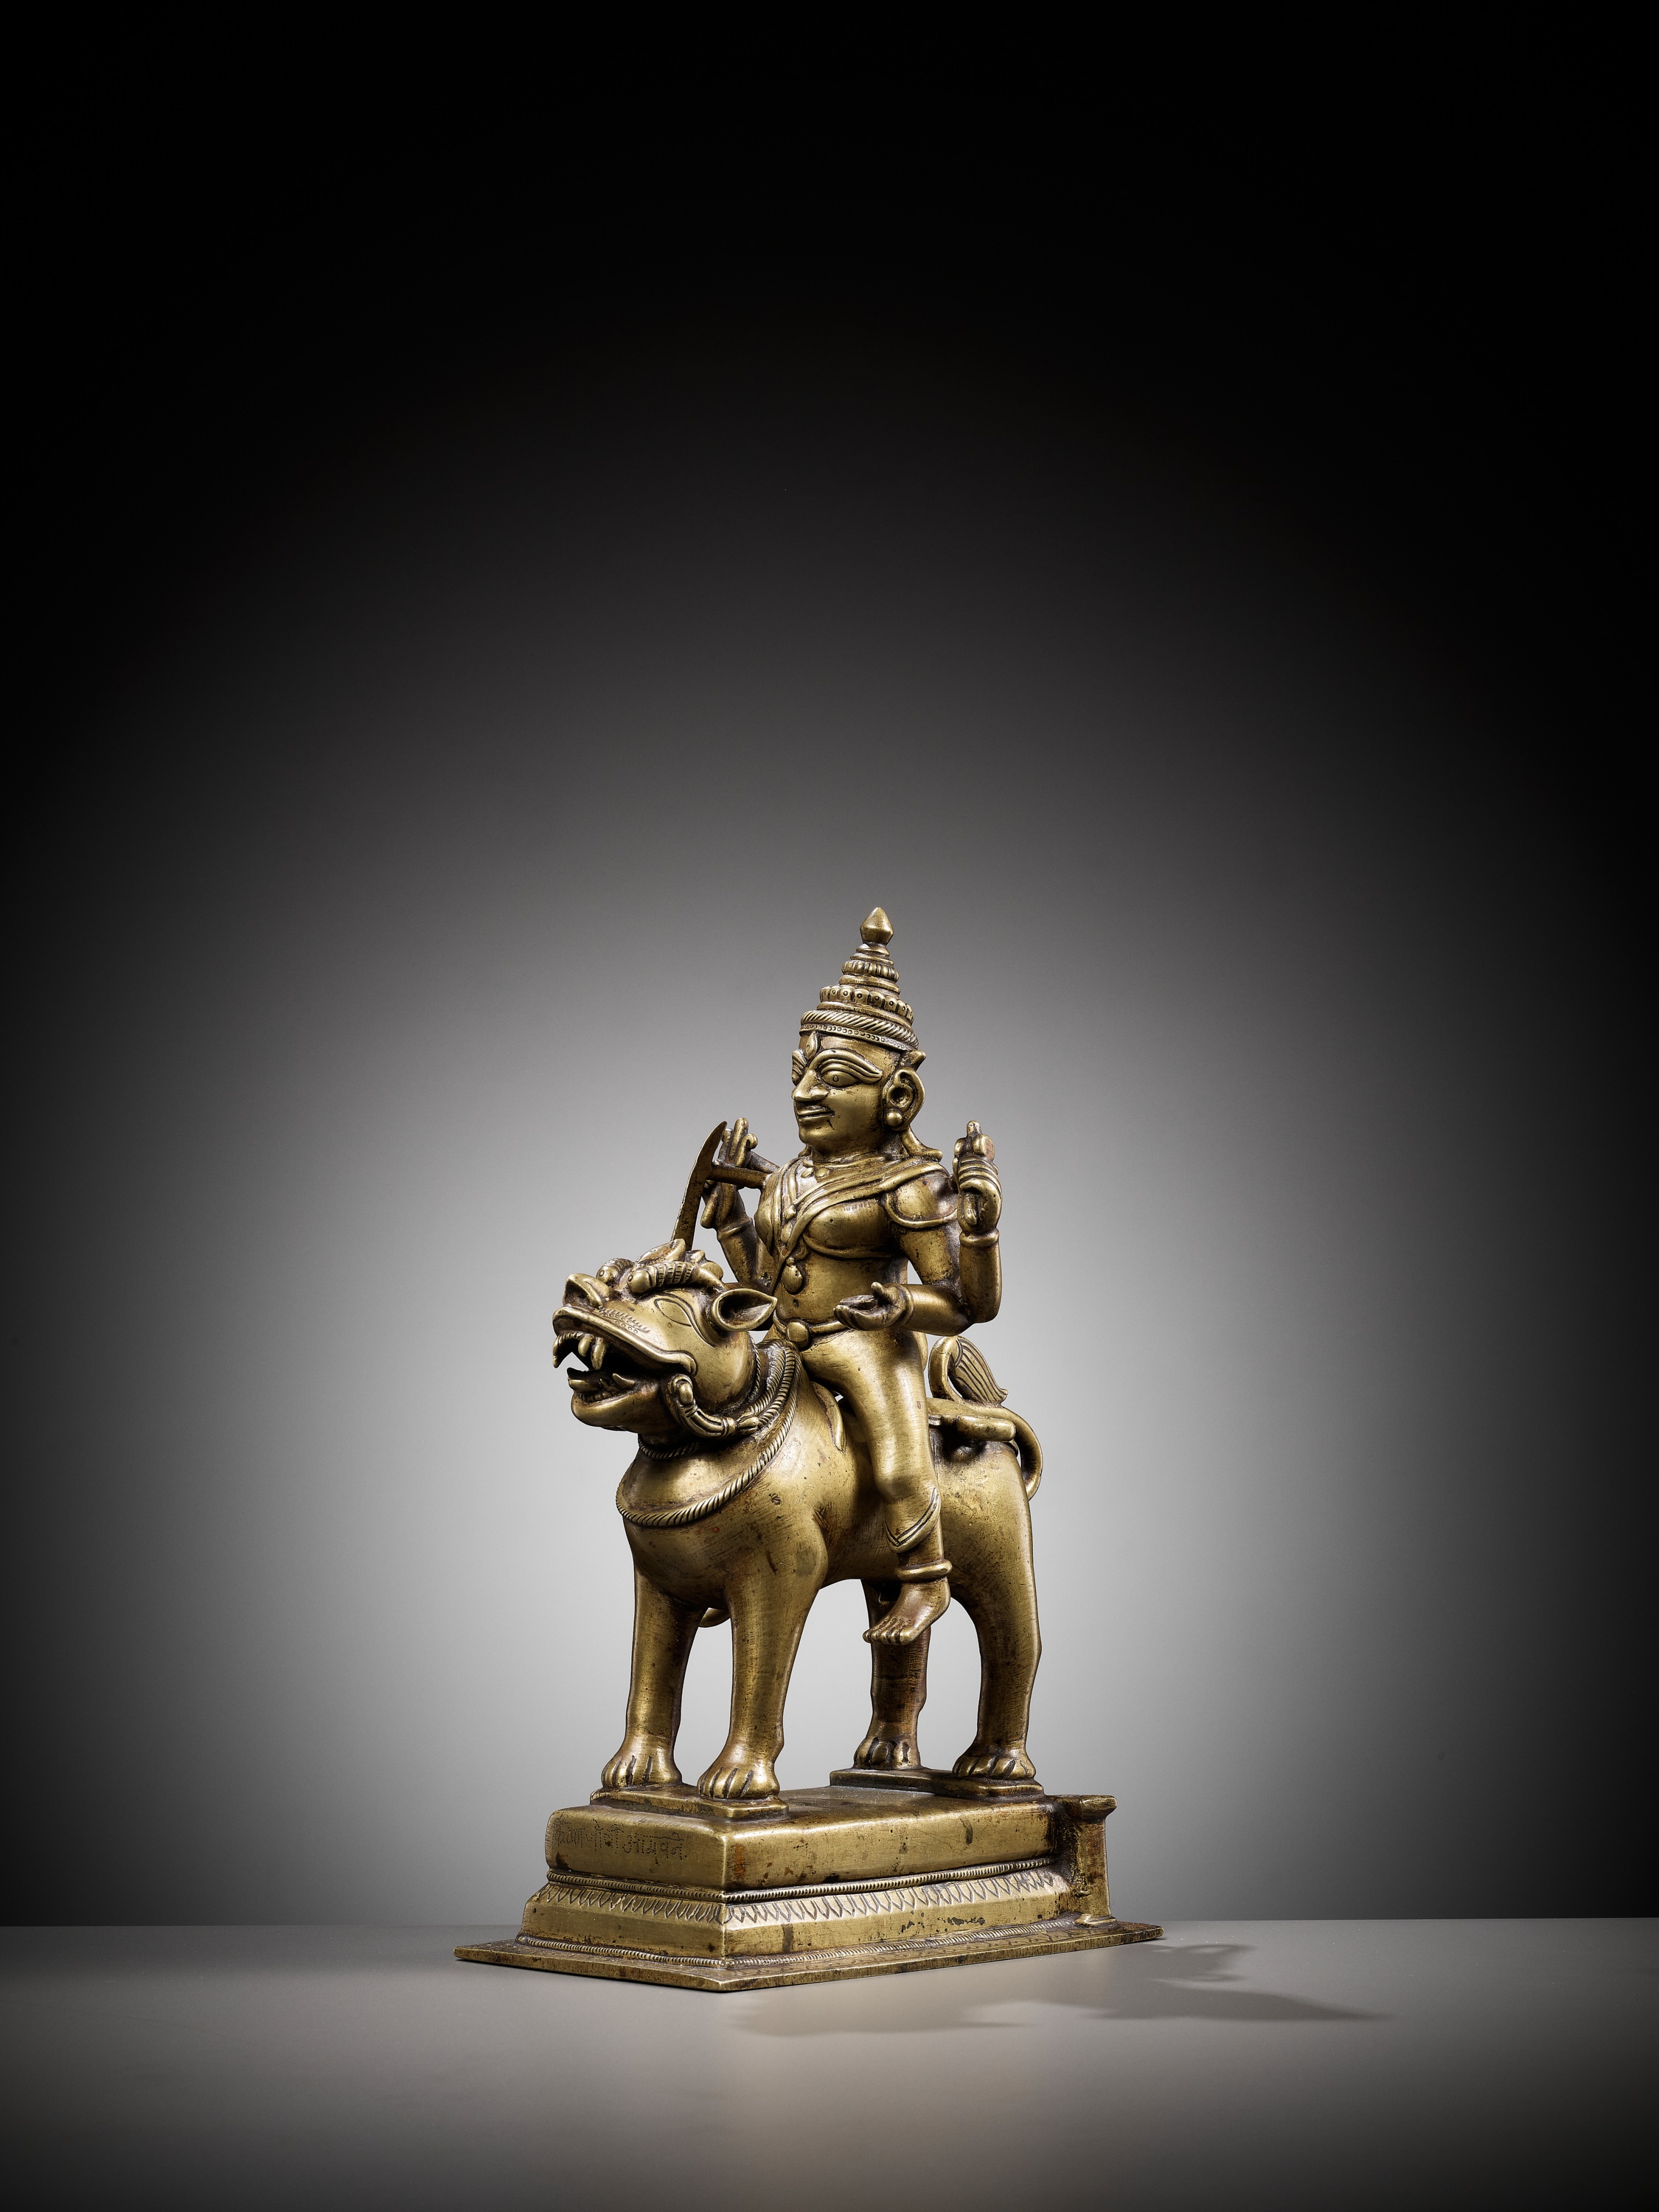 A BRONZE FIGURE OF DURGA RIDING A LION, INDIA, 15TH CENTURY - Image 6 of 11